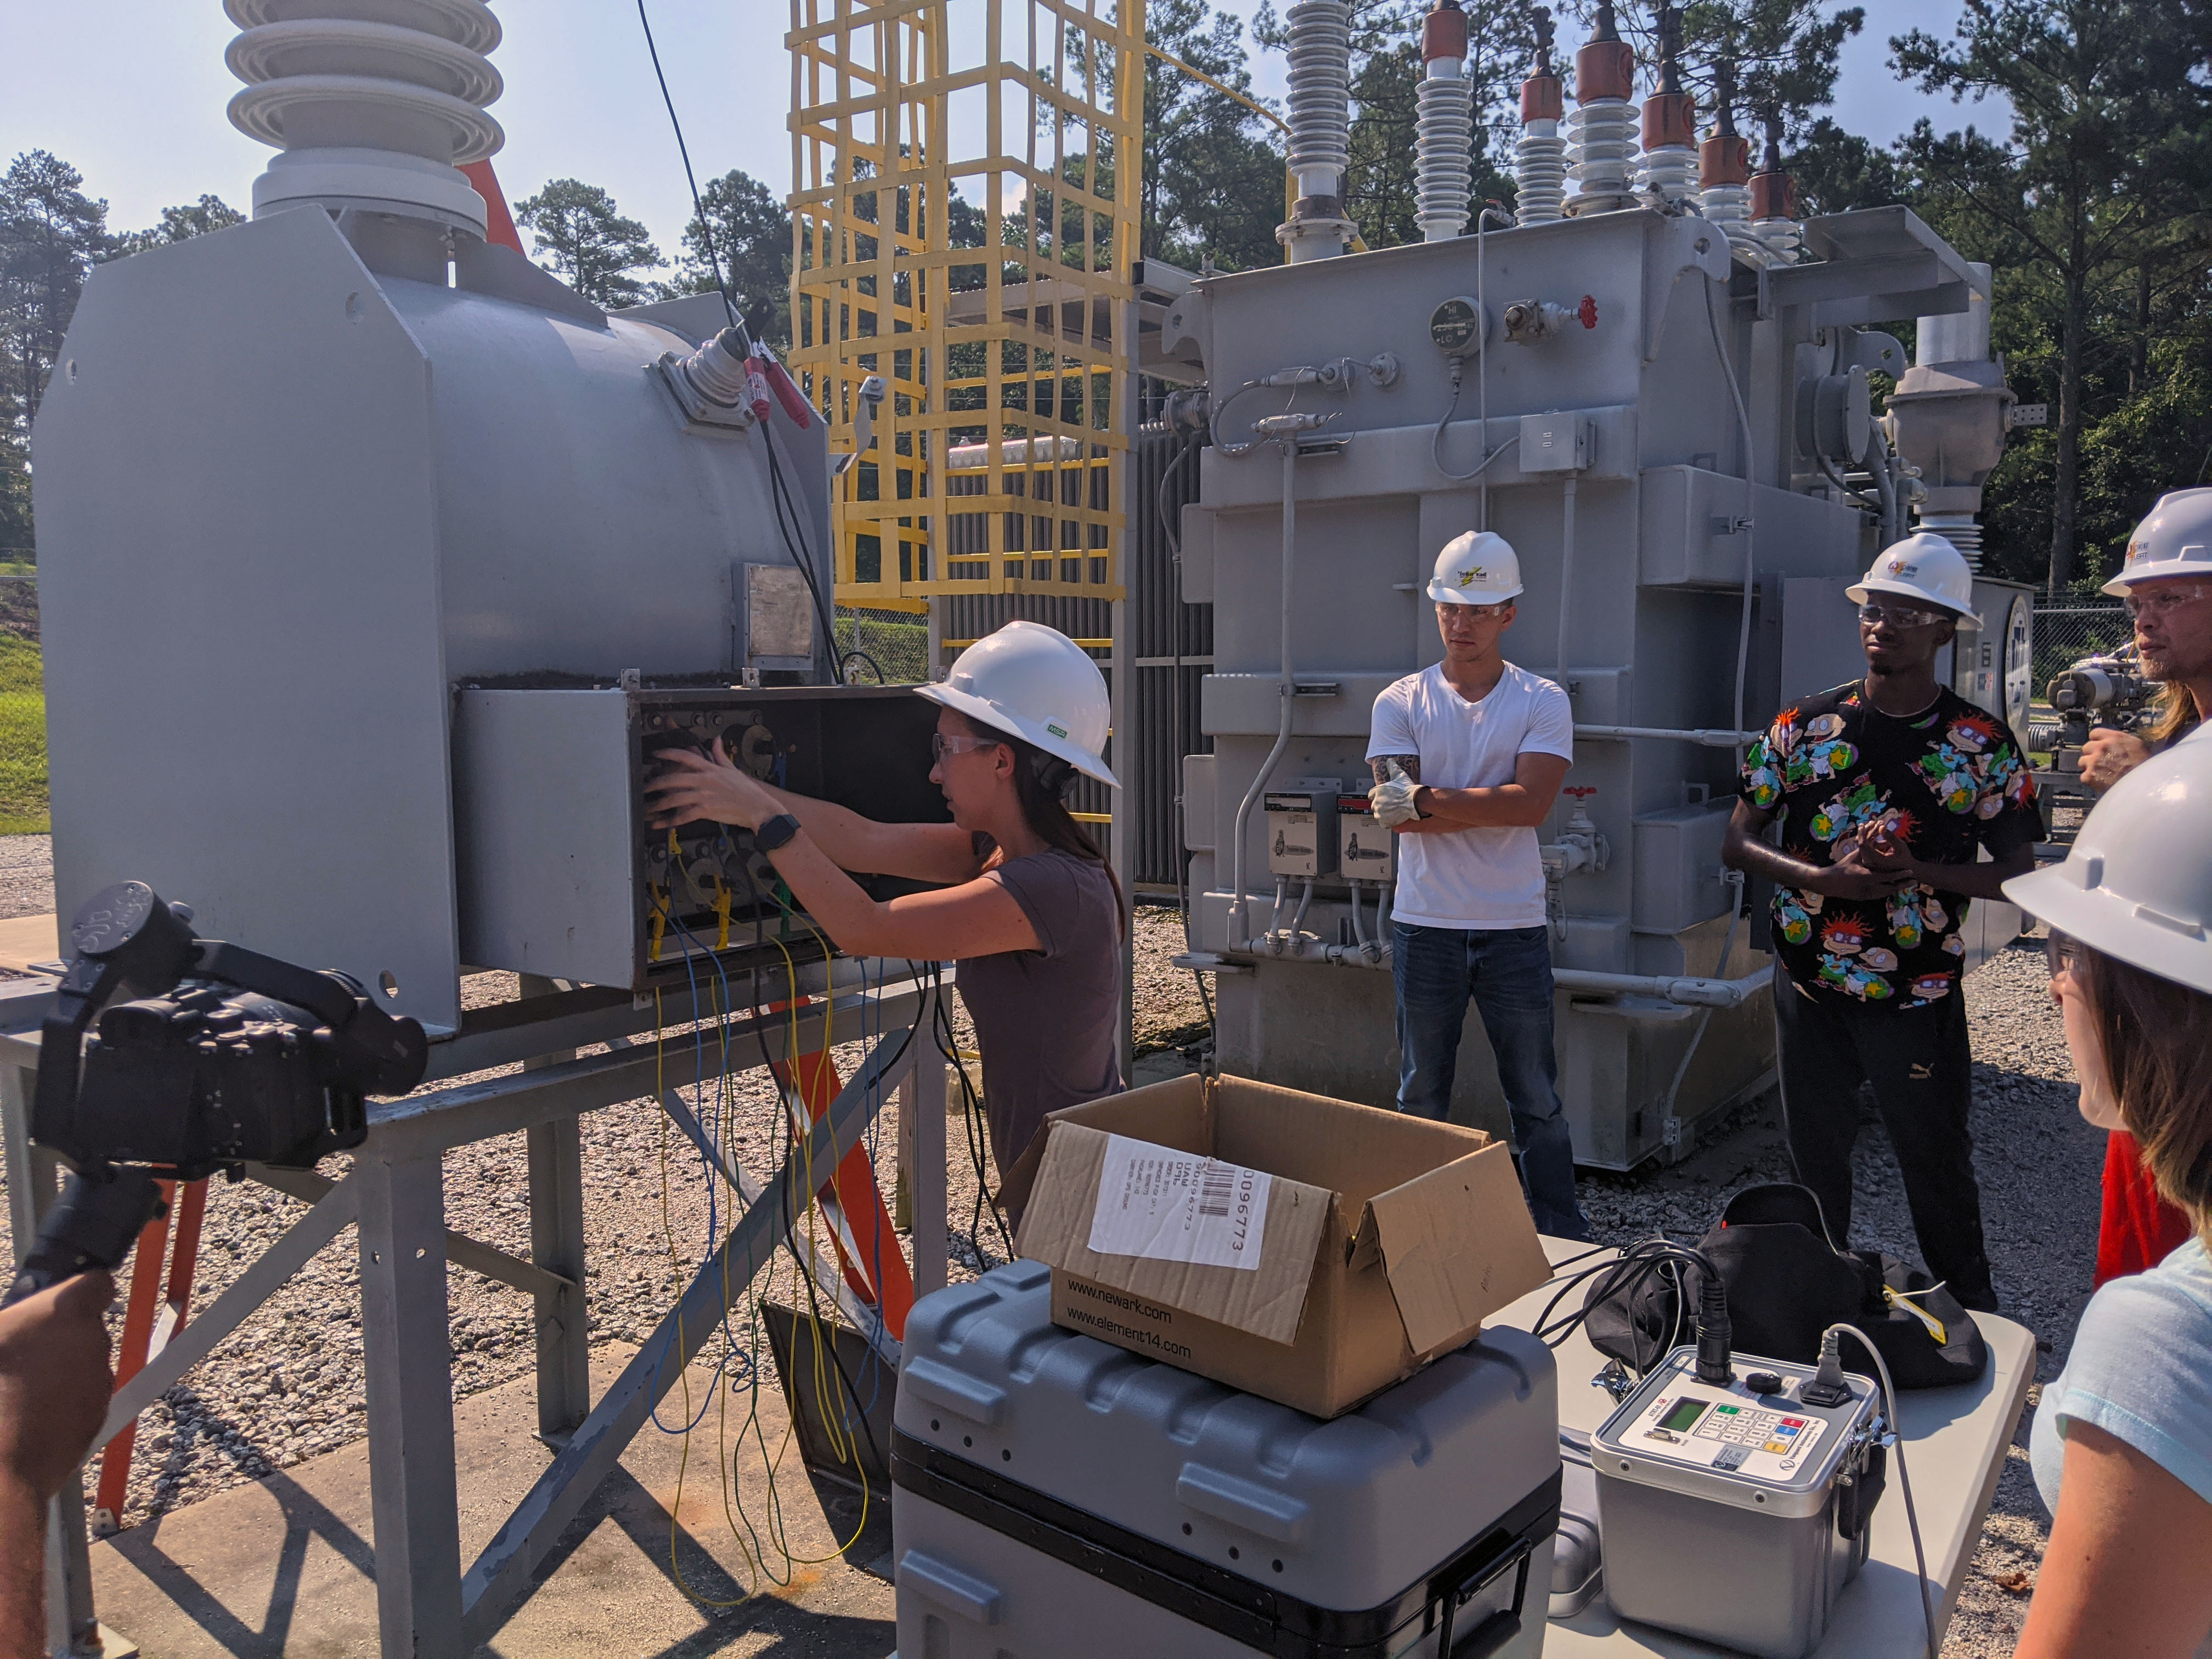 Students stand in the substation and work on testing equipment